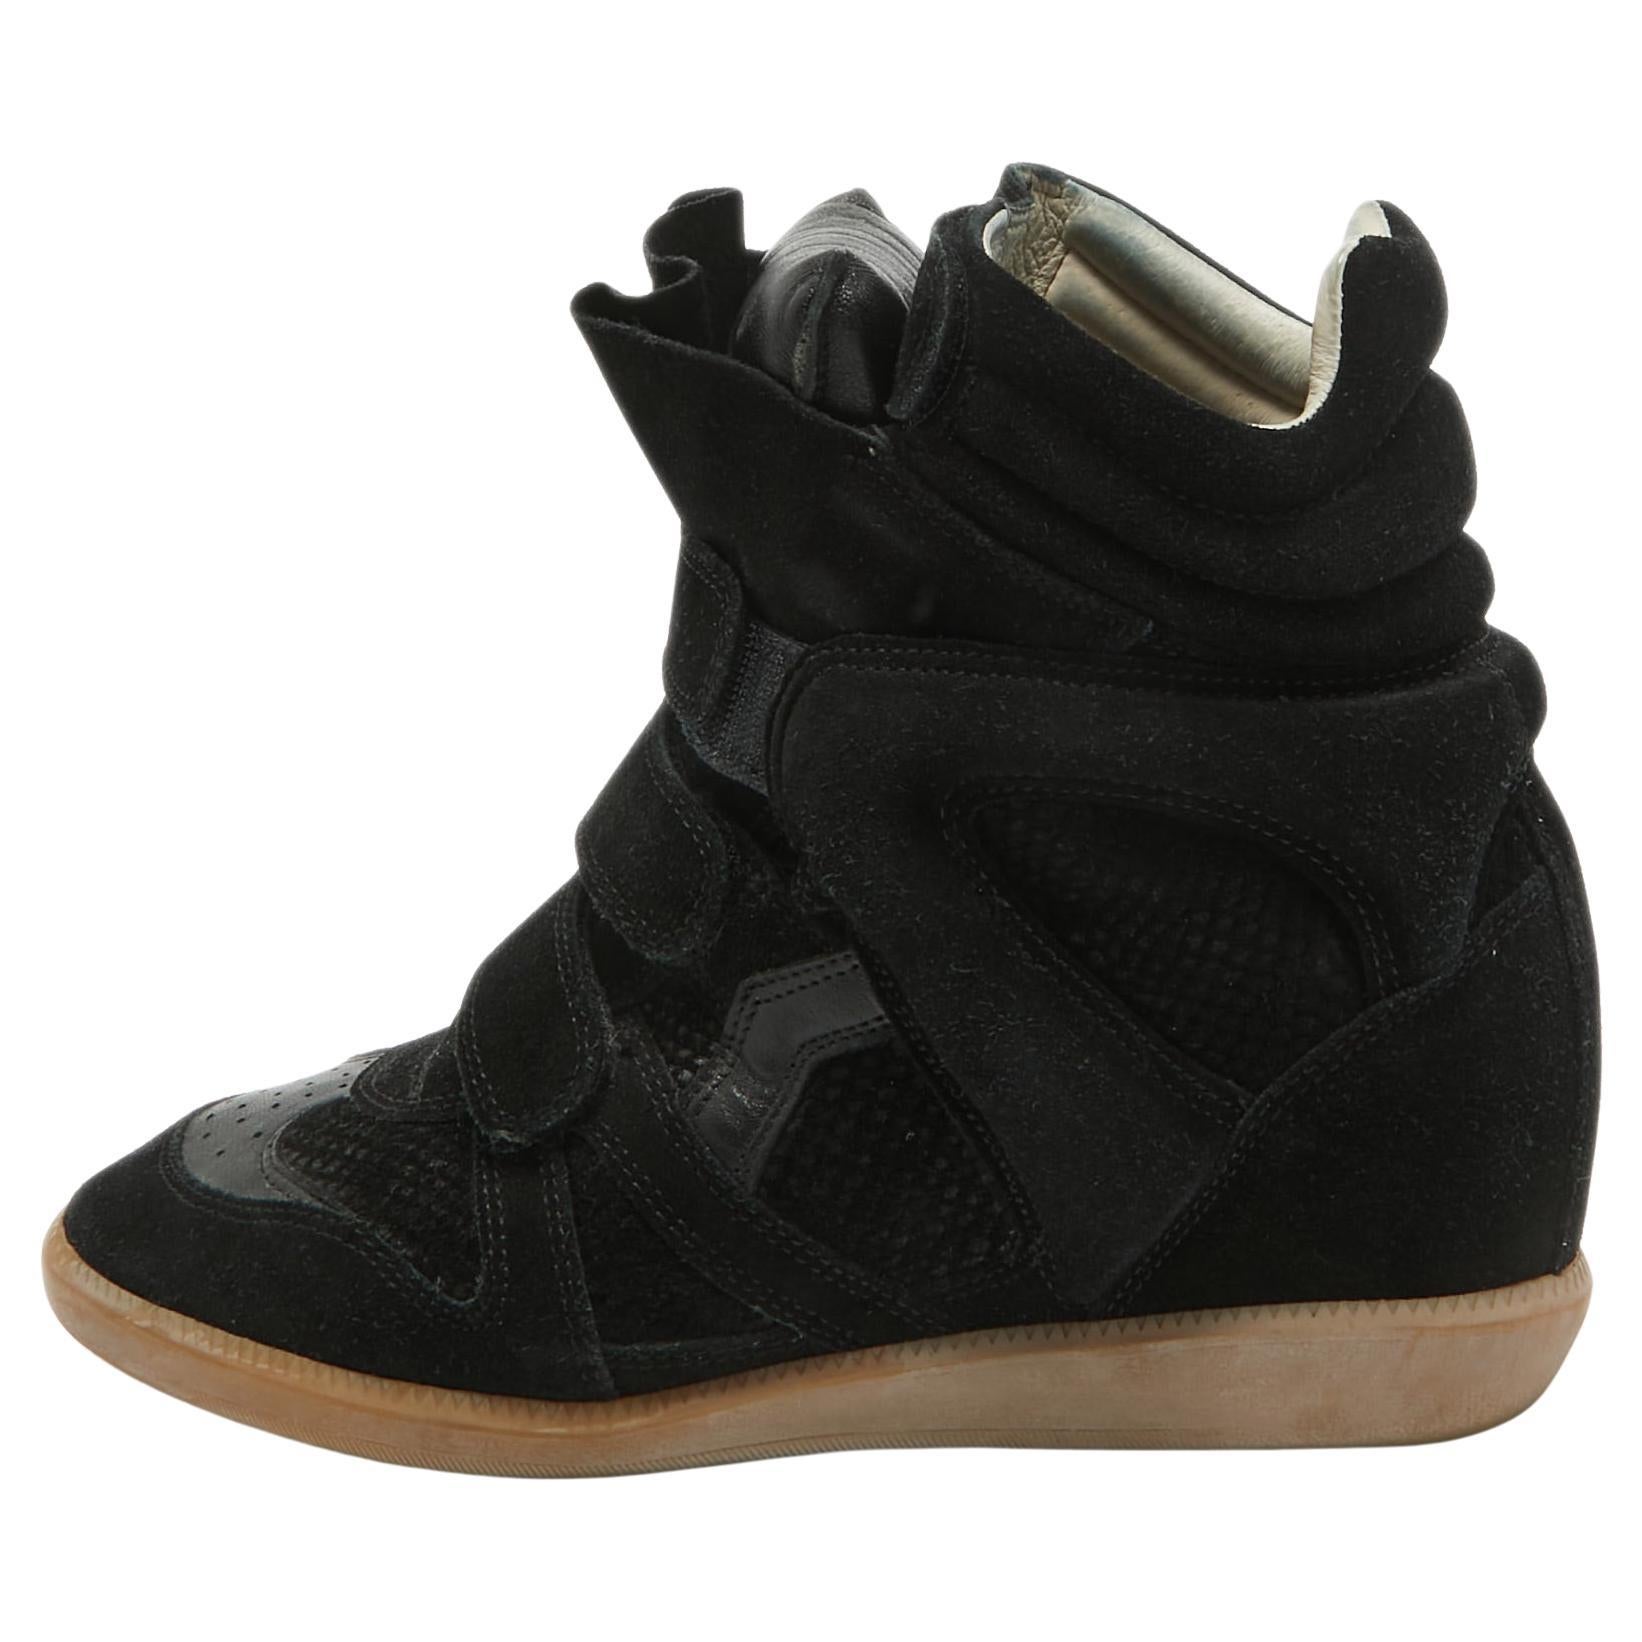 Isabel Marant Black Leather and Suede Over Basket Wedge High Top Sneakers Size 3